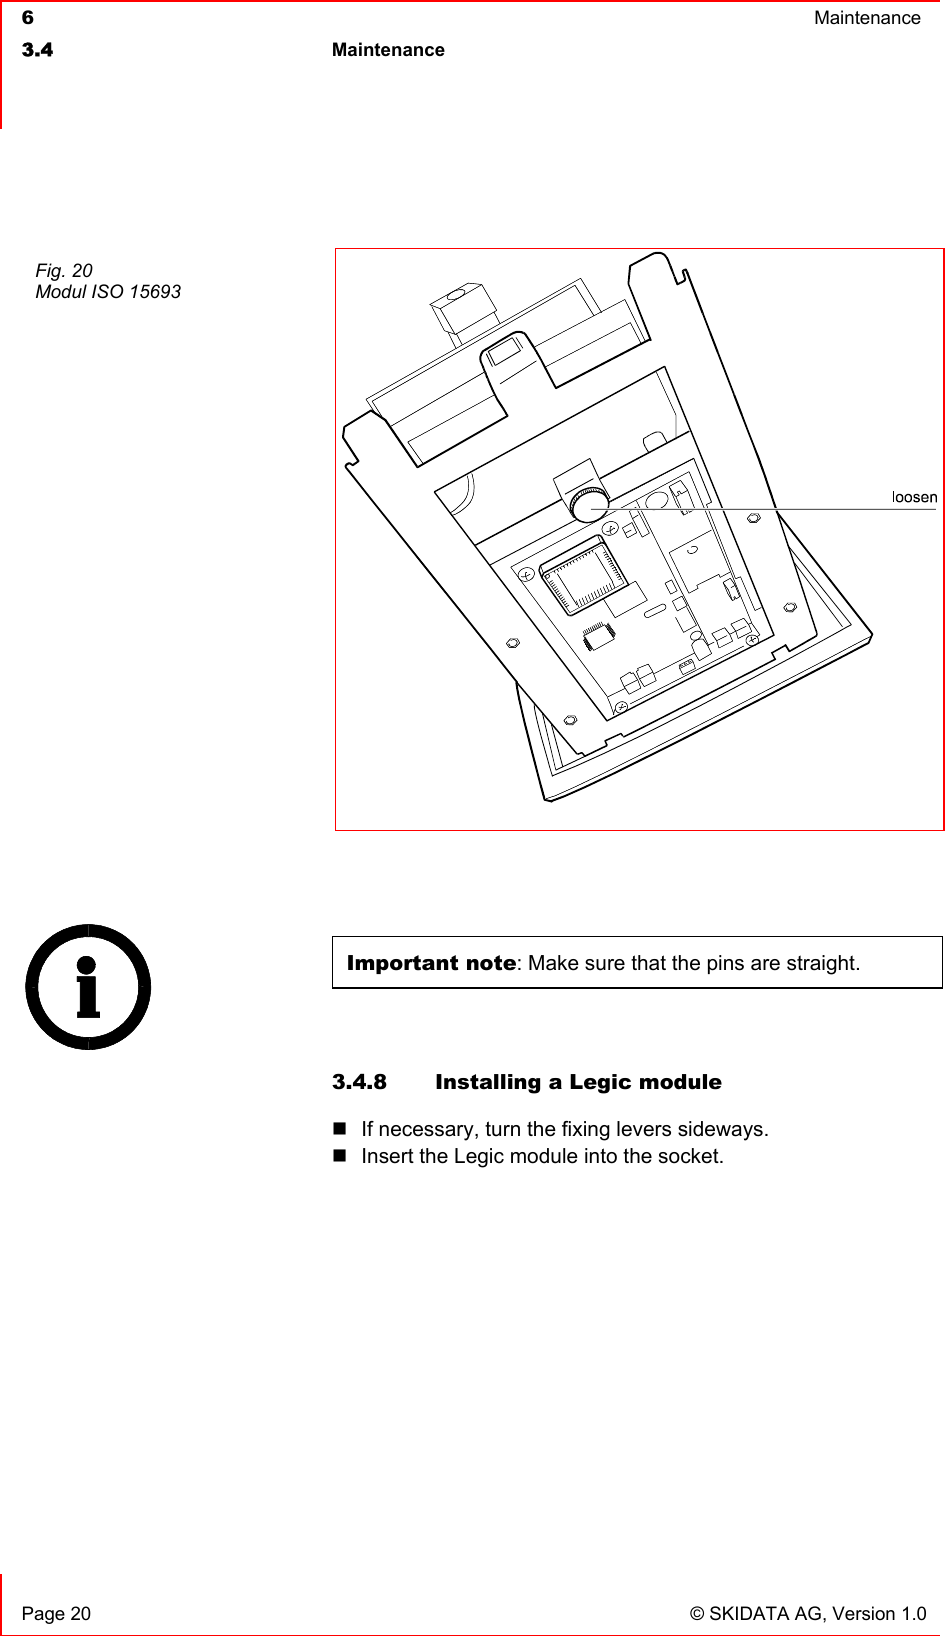  6  Maintenance  3.4 Maintenance     Page 20  © SKIDATA AG, Version 1.0   Important note: Make sure that the pins are straight.  3.4.8  Installing a Legic module  If necessary, turn the fixing levers sideways.  Insert the Legic module into the socket.     Fig. 20 Modul ISO 15693  